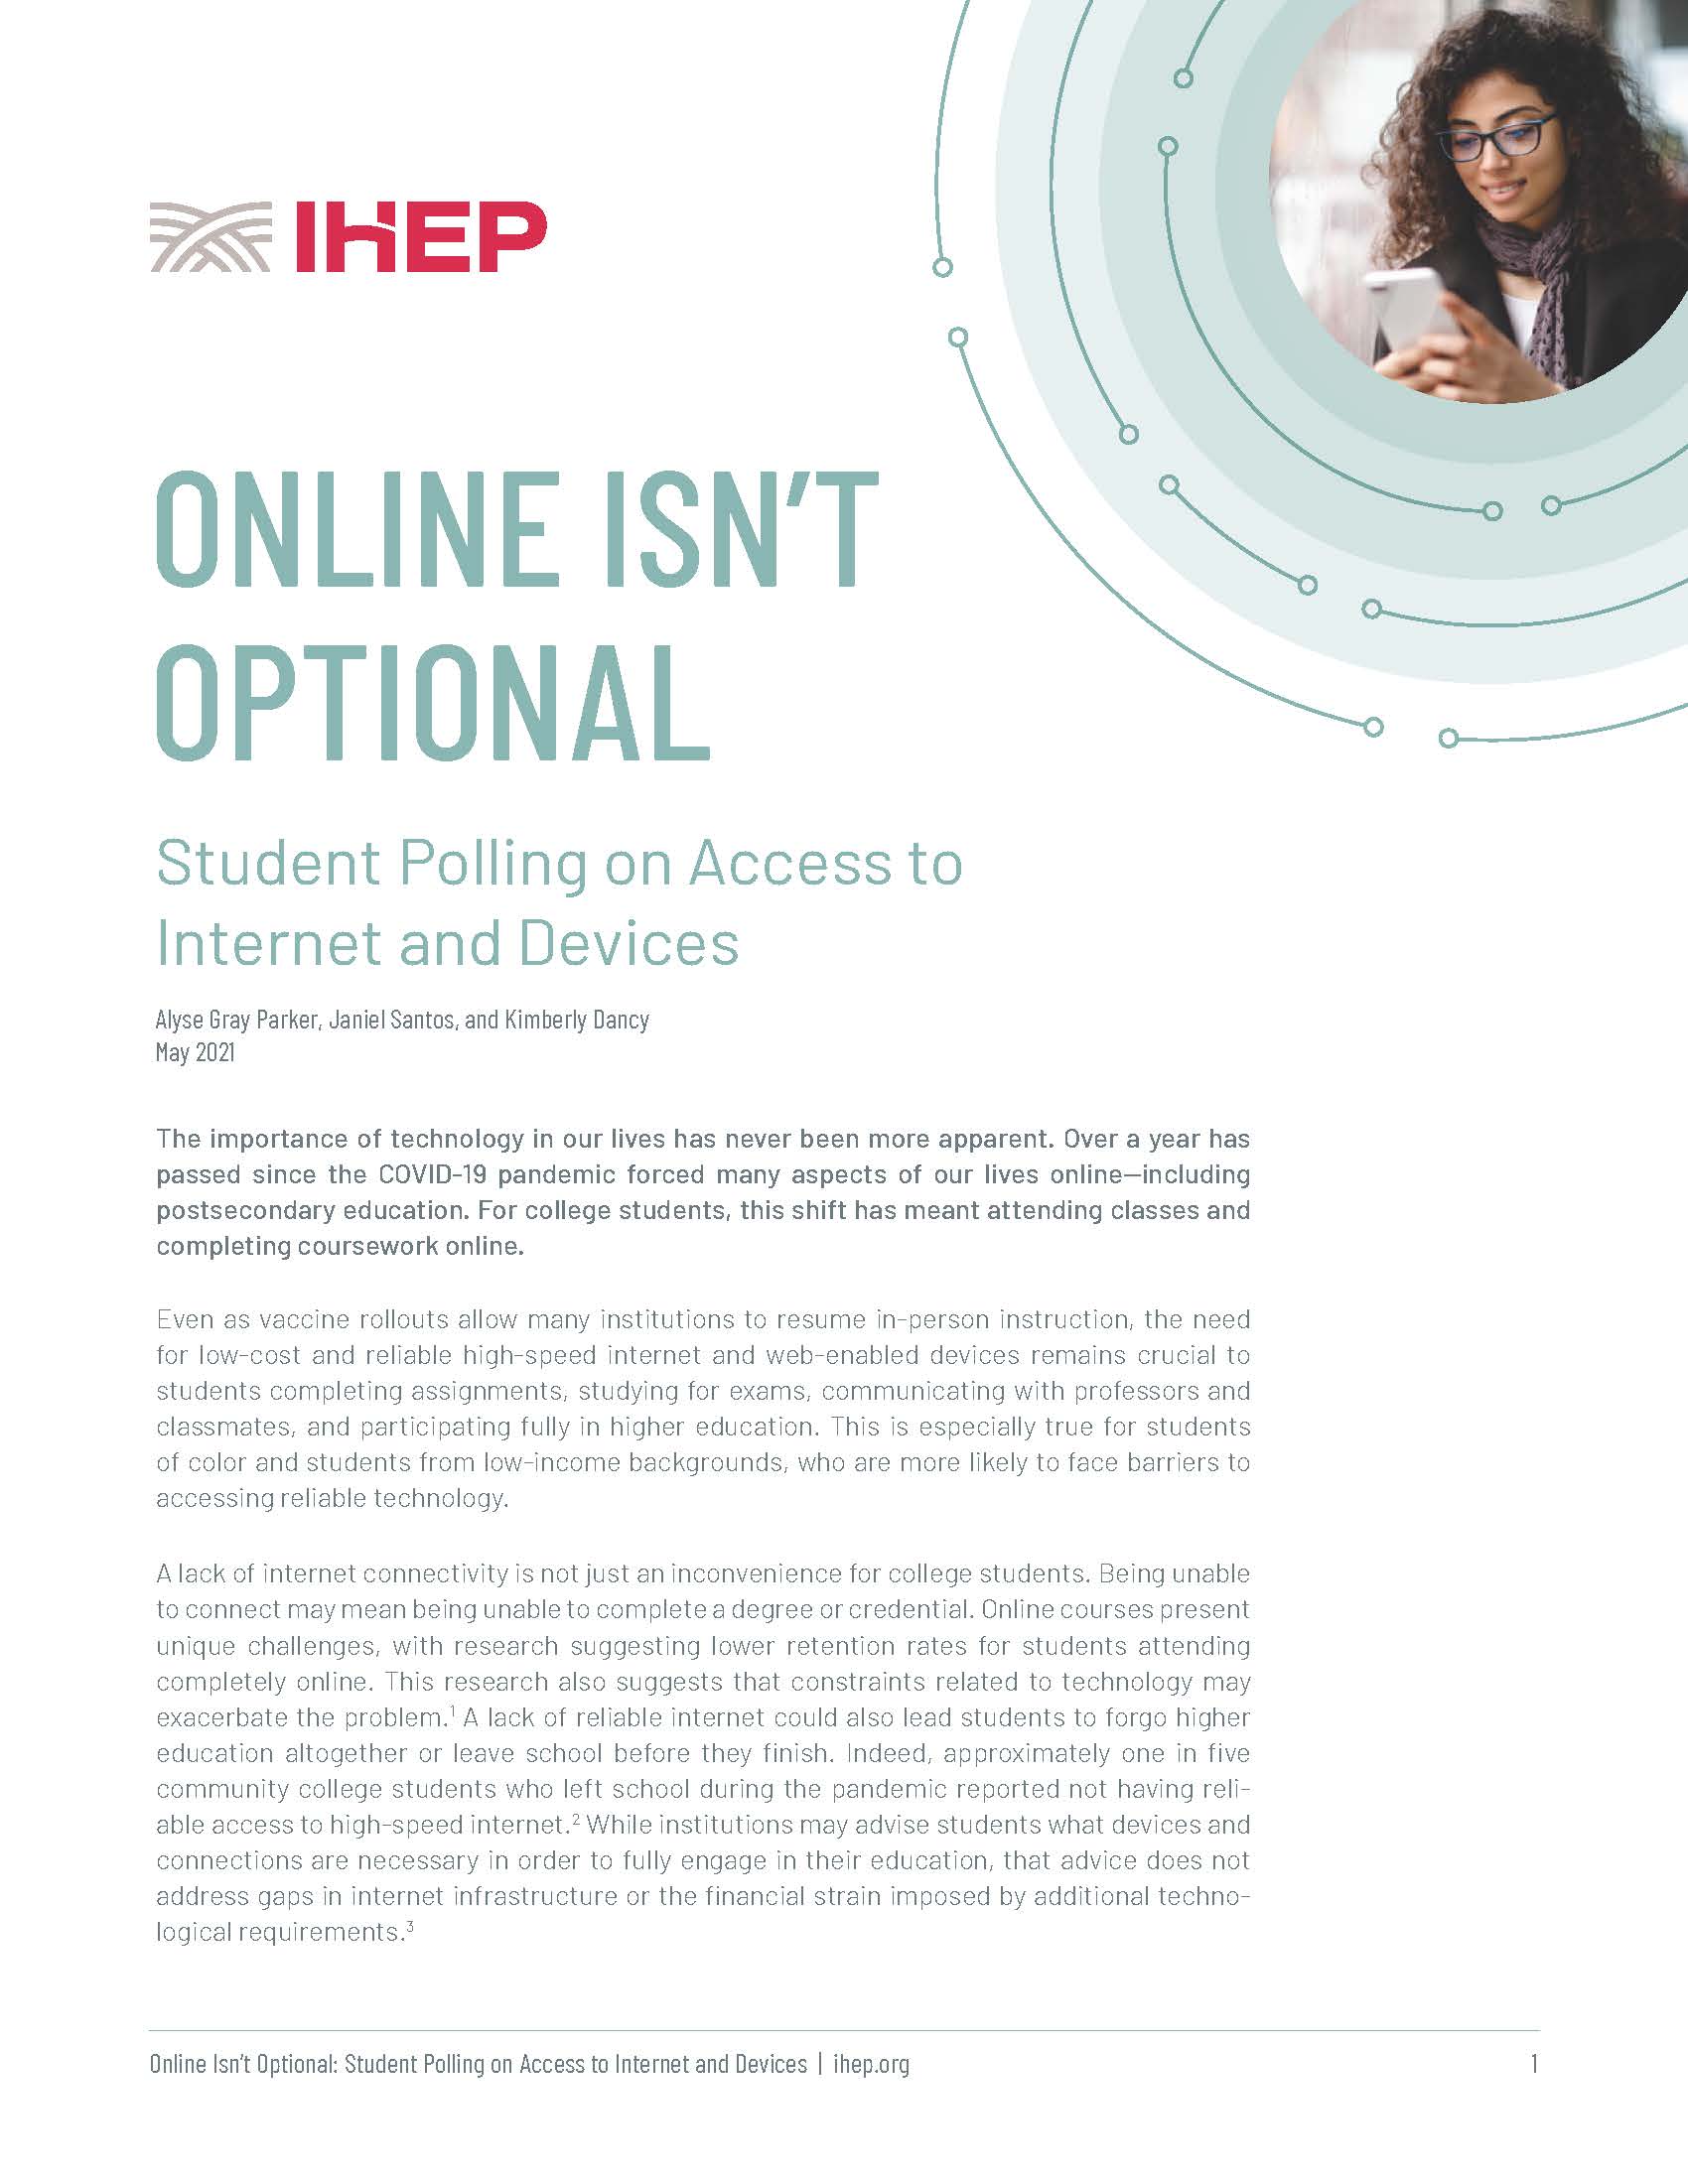 Online Isn’t Optional: Student Polling on Access to Internet and Devices